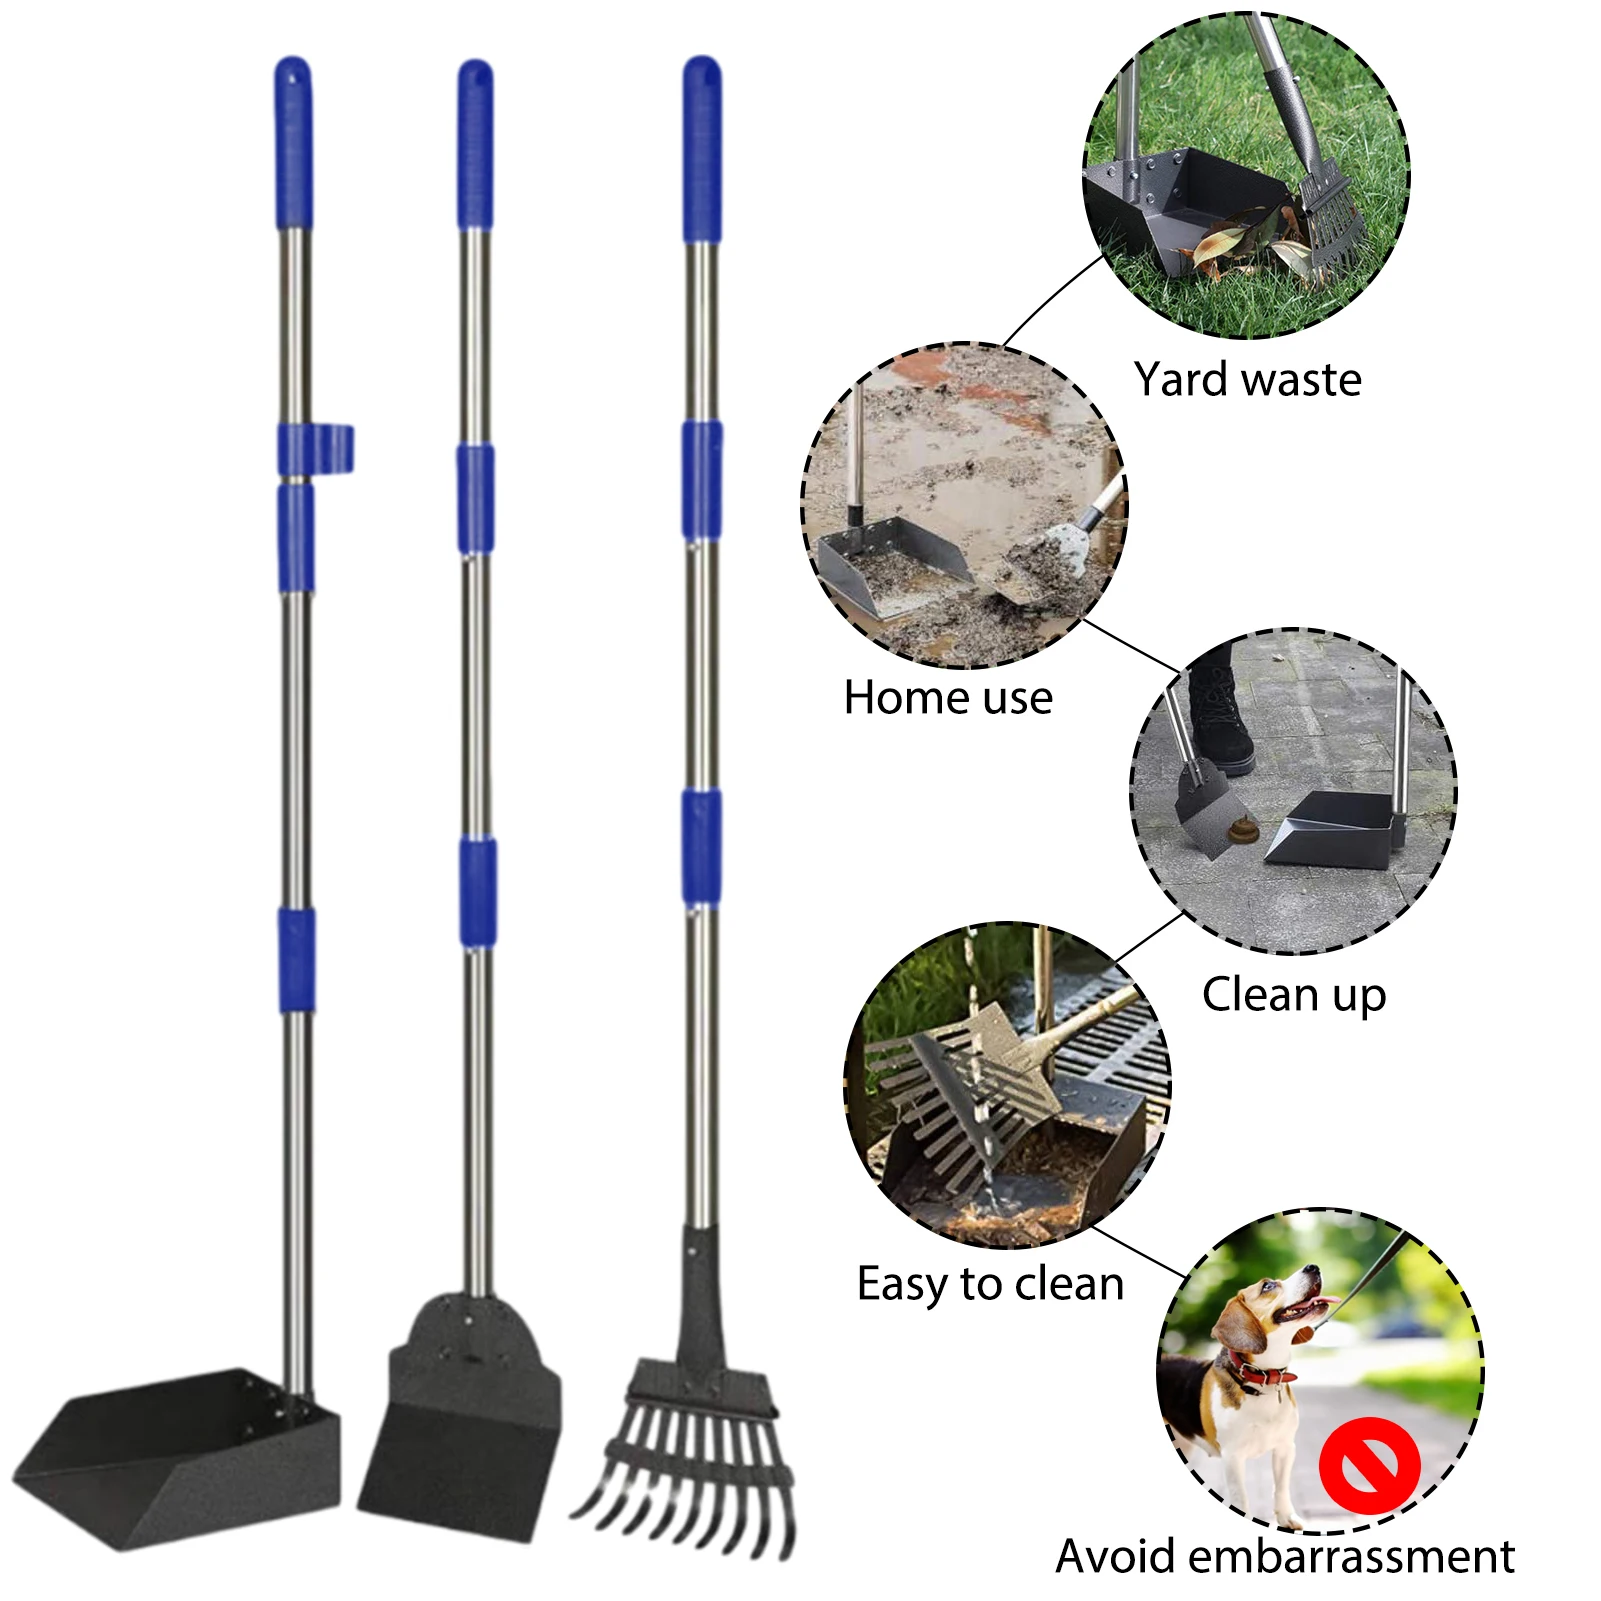 

Dog Pooper Scooper Pet Trash Cleaning With Metal Rake Tray Spade For Large Medium Small Dogs Pets, Great For Grass Dirt Gravel